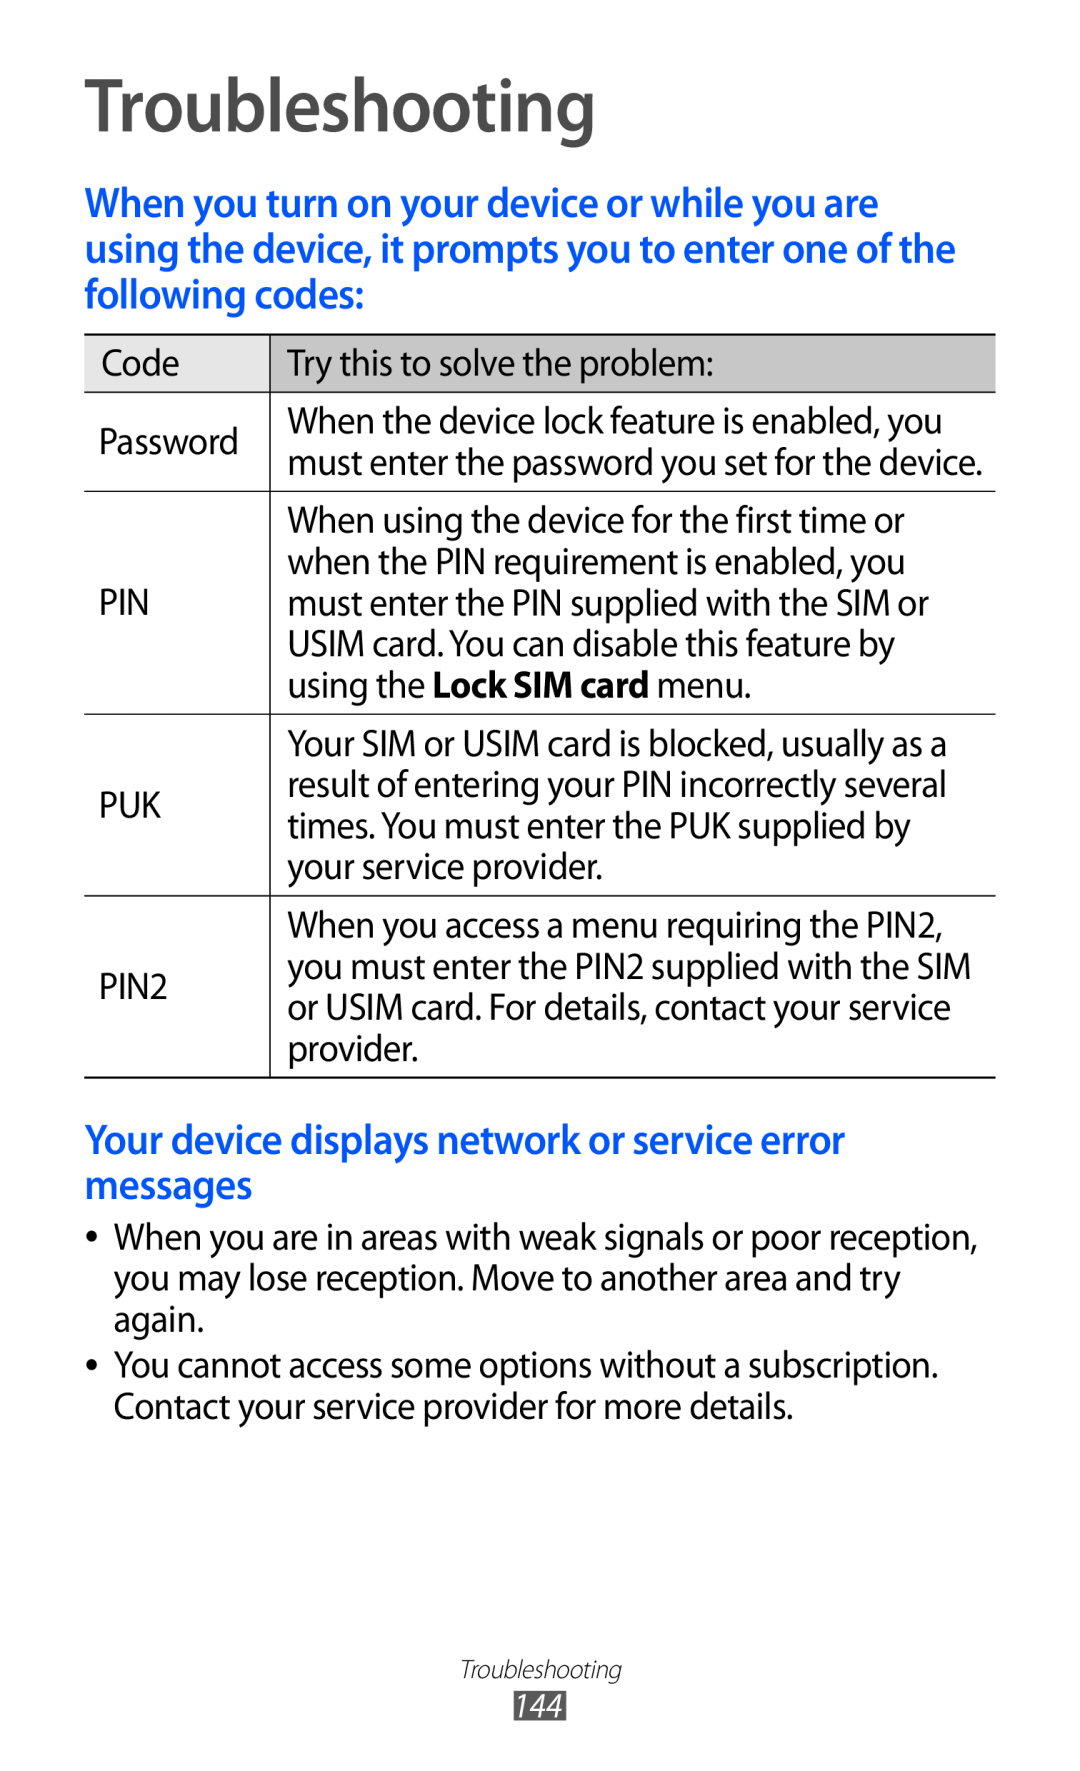 Samsung GT-I9070 user manual Troubleshooting, Your device displays network or service error messages 